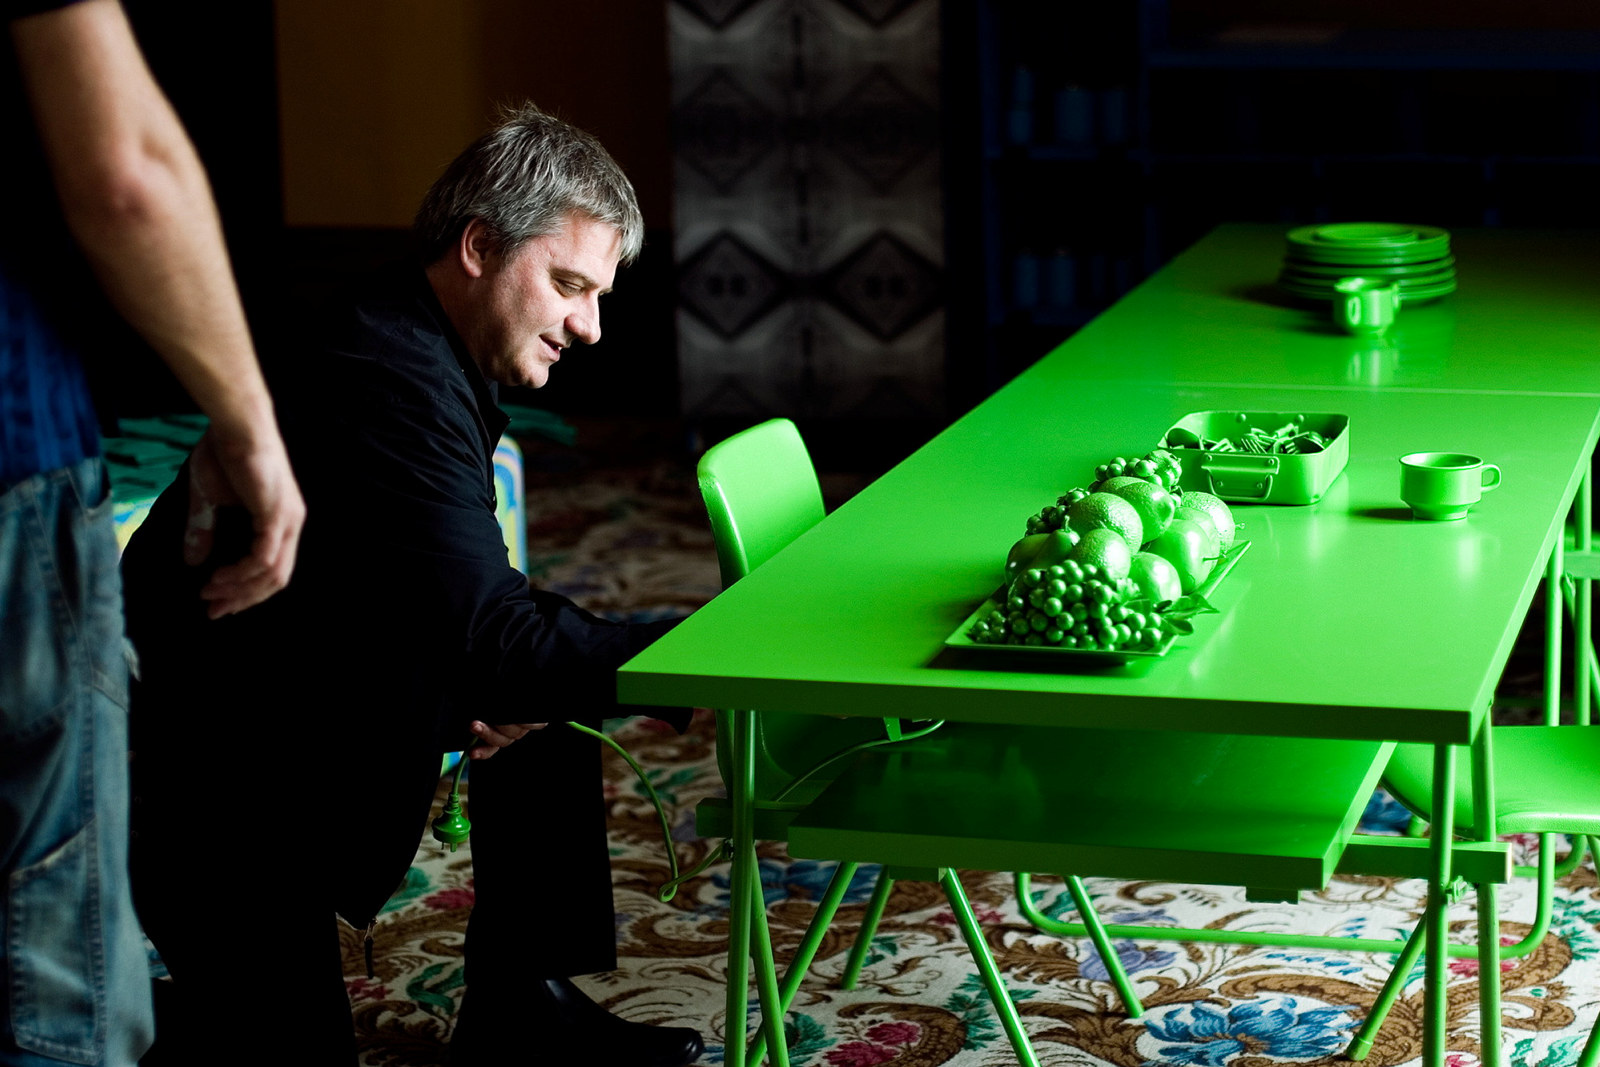 Image of a man making adjustments to a green table